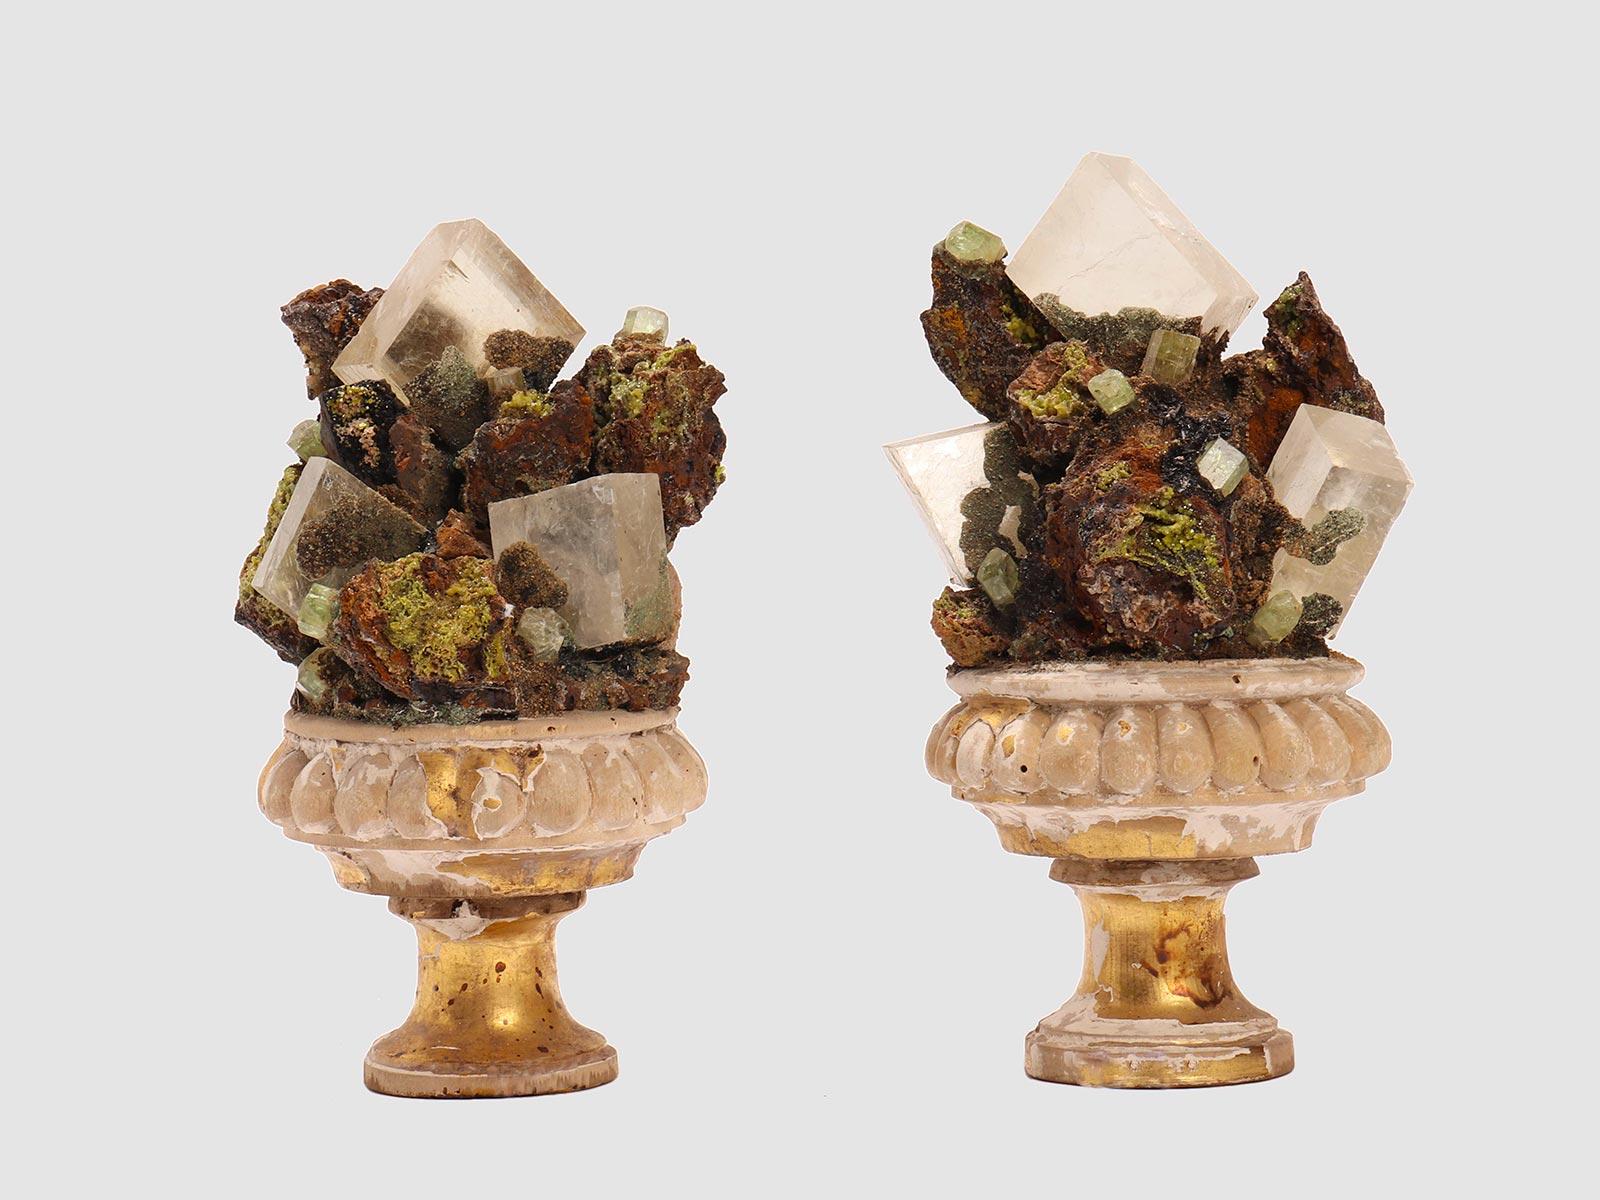 A Naturalia mineral specimen. A pair of Elbanite crystals and quartz druzes, mounted over a gold-plated wooden base vase shape, Italy, circa 1880.